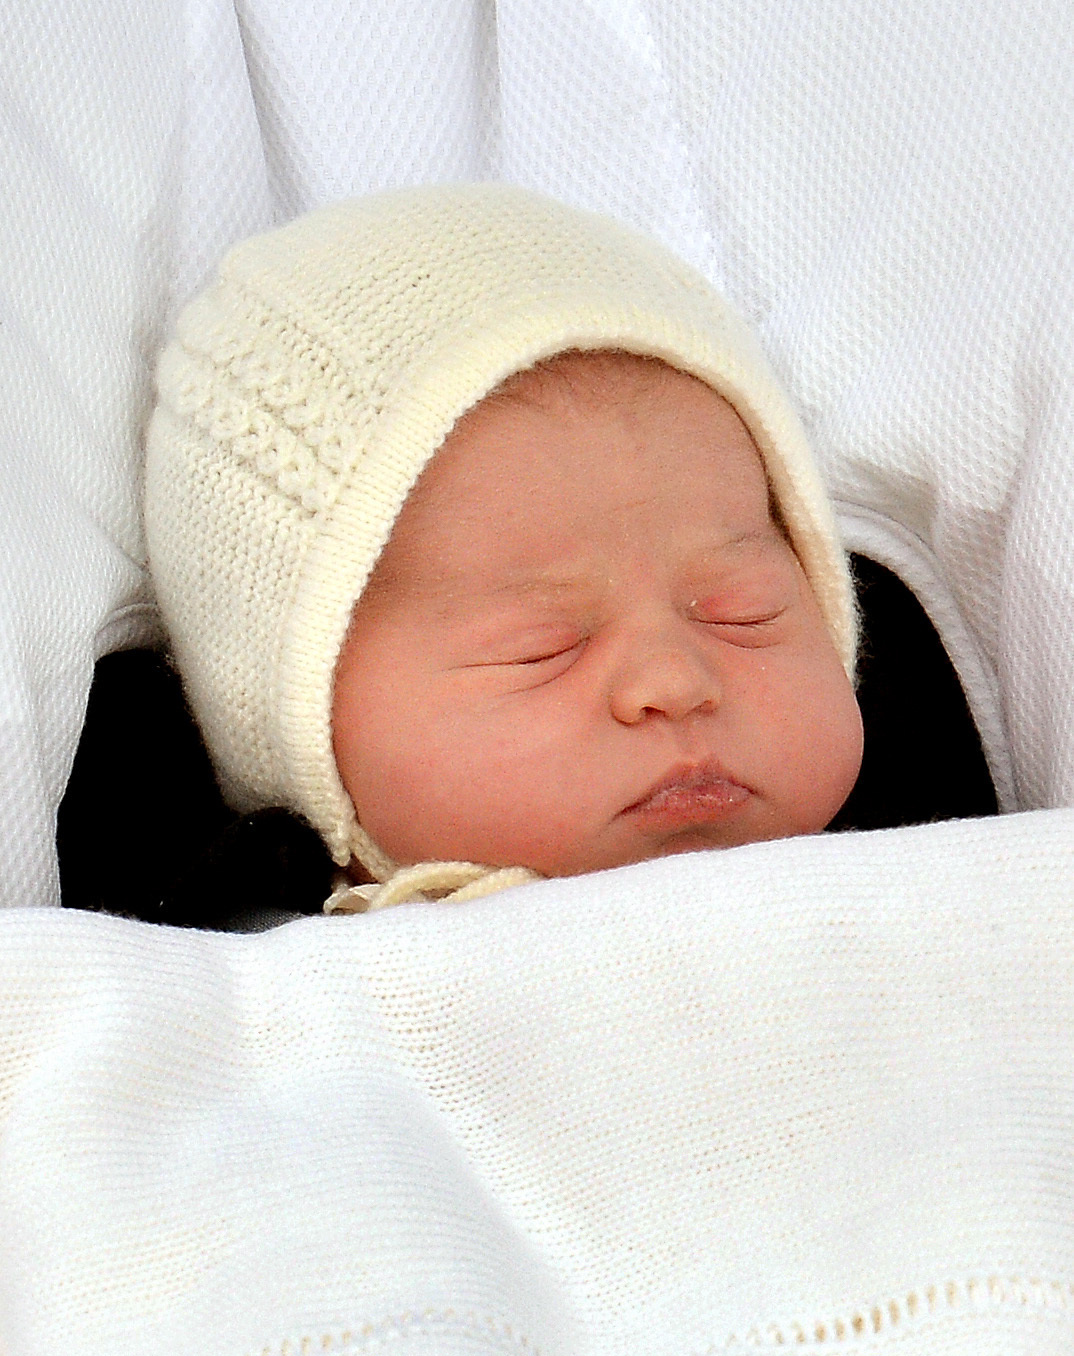 Princess Charlotte on May 2, 2015. (John Stillwell—PA Wire/Press Association Images/AP Images)